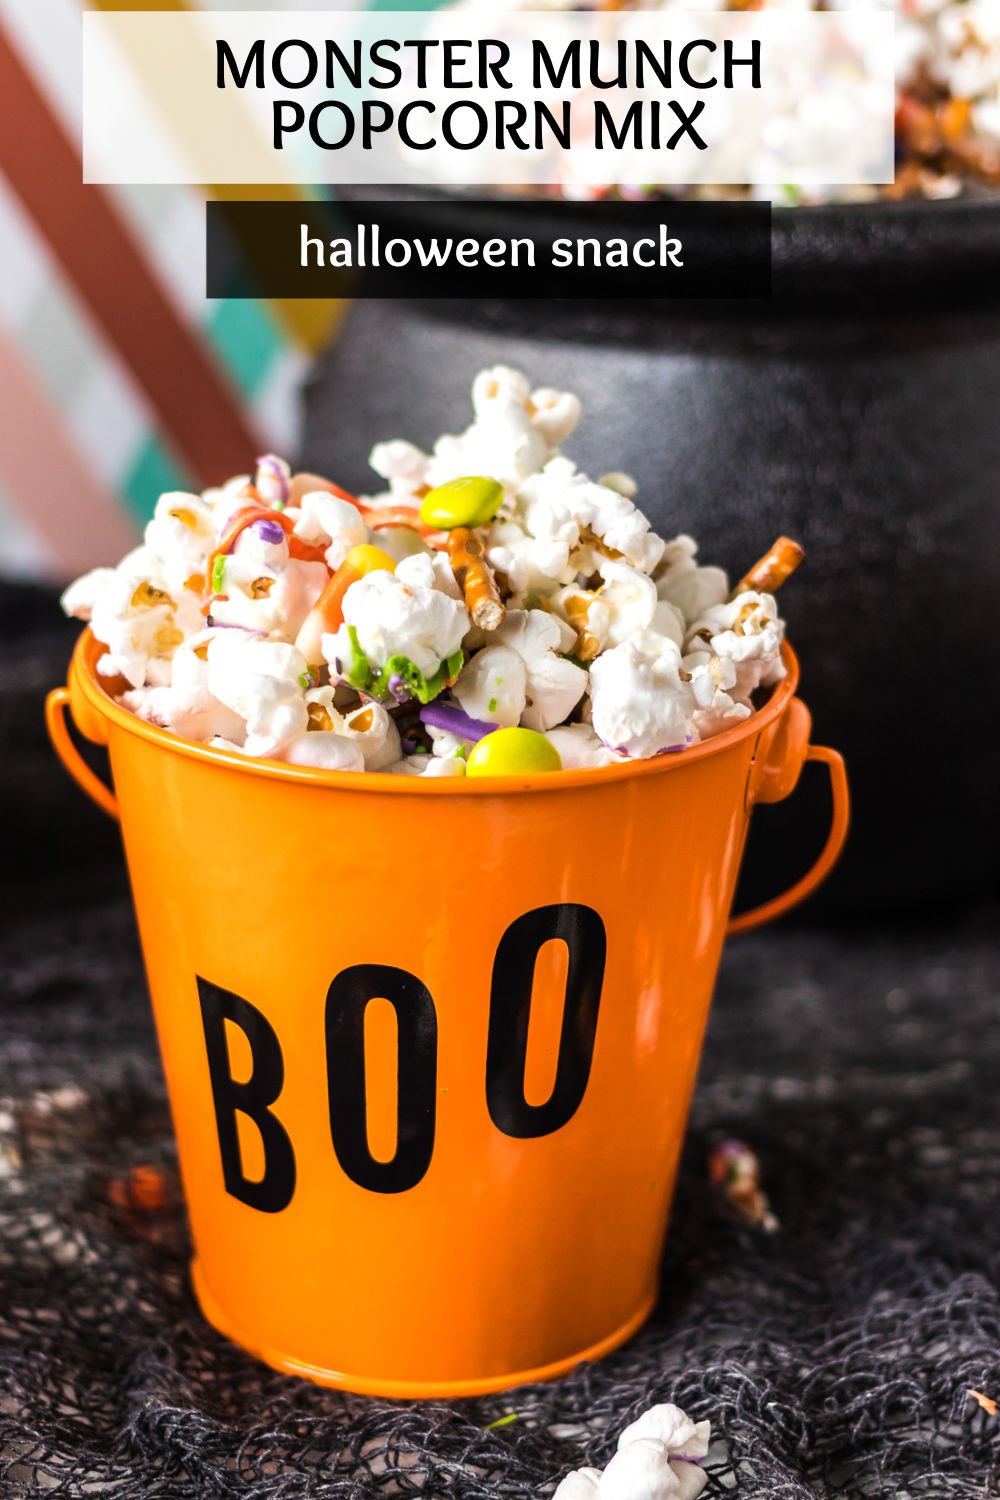 Halloween Monster Munch Popcorn Mix is a super easy party treat made with popcorn, pretzels, and Halloween candy that is drizzled with colorful vanilla candy melts. It's a perfect blend of salty, sweet, and delicious for a fun Halloween snack. | www.persnicketyplates.com